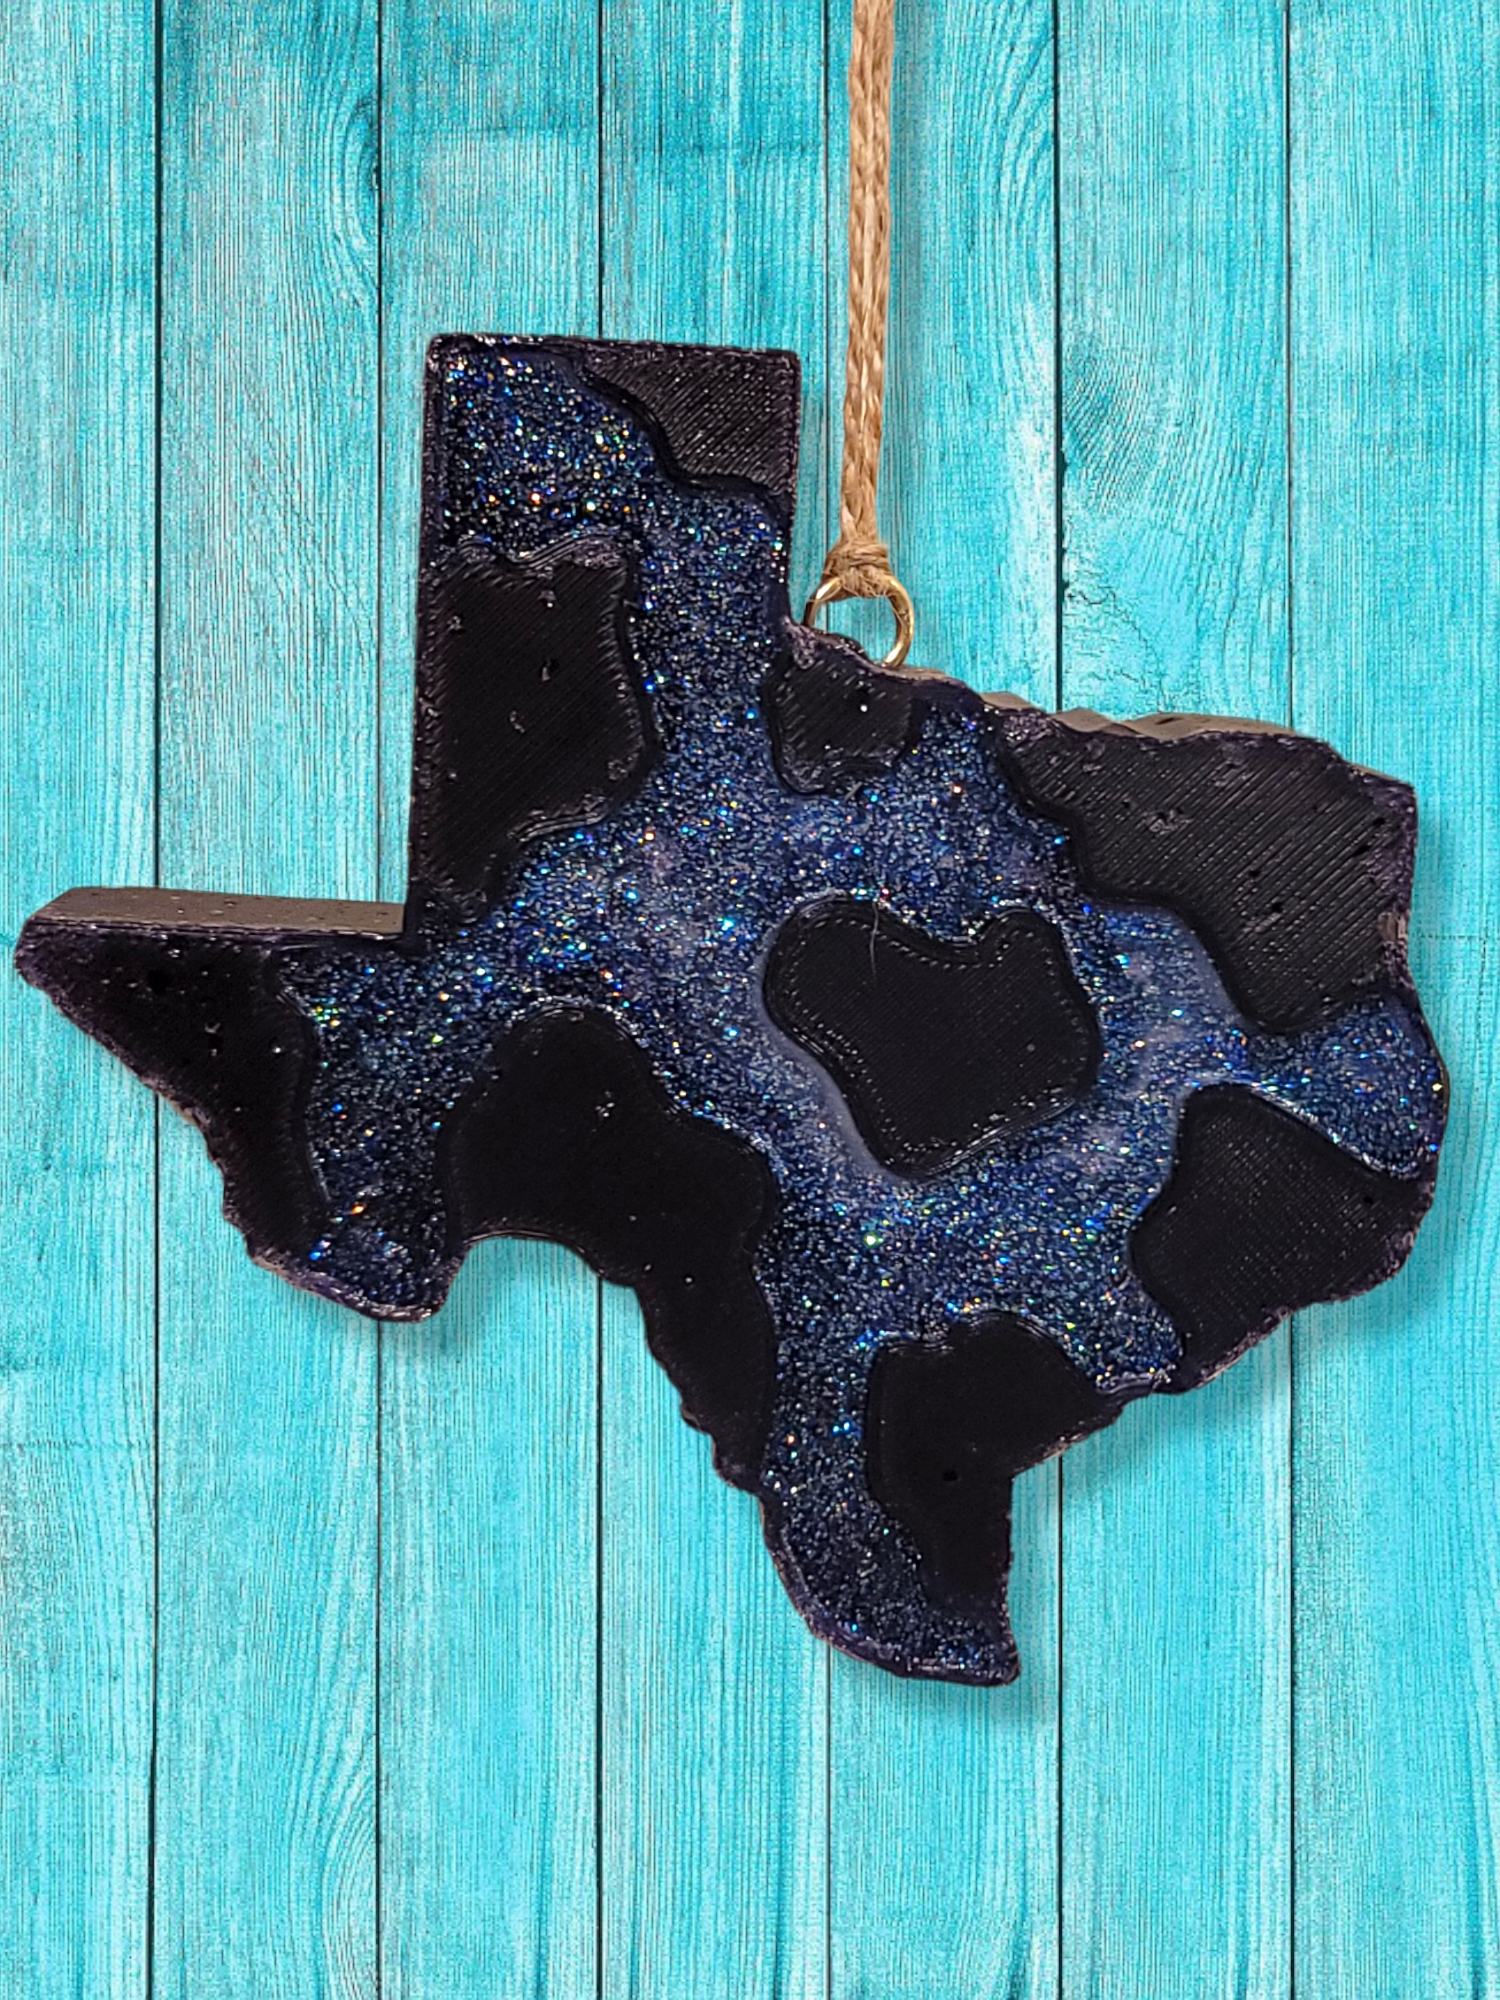 Texas With Hand Painted Blue Bonnets Car Freshies, Car Scents, Car